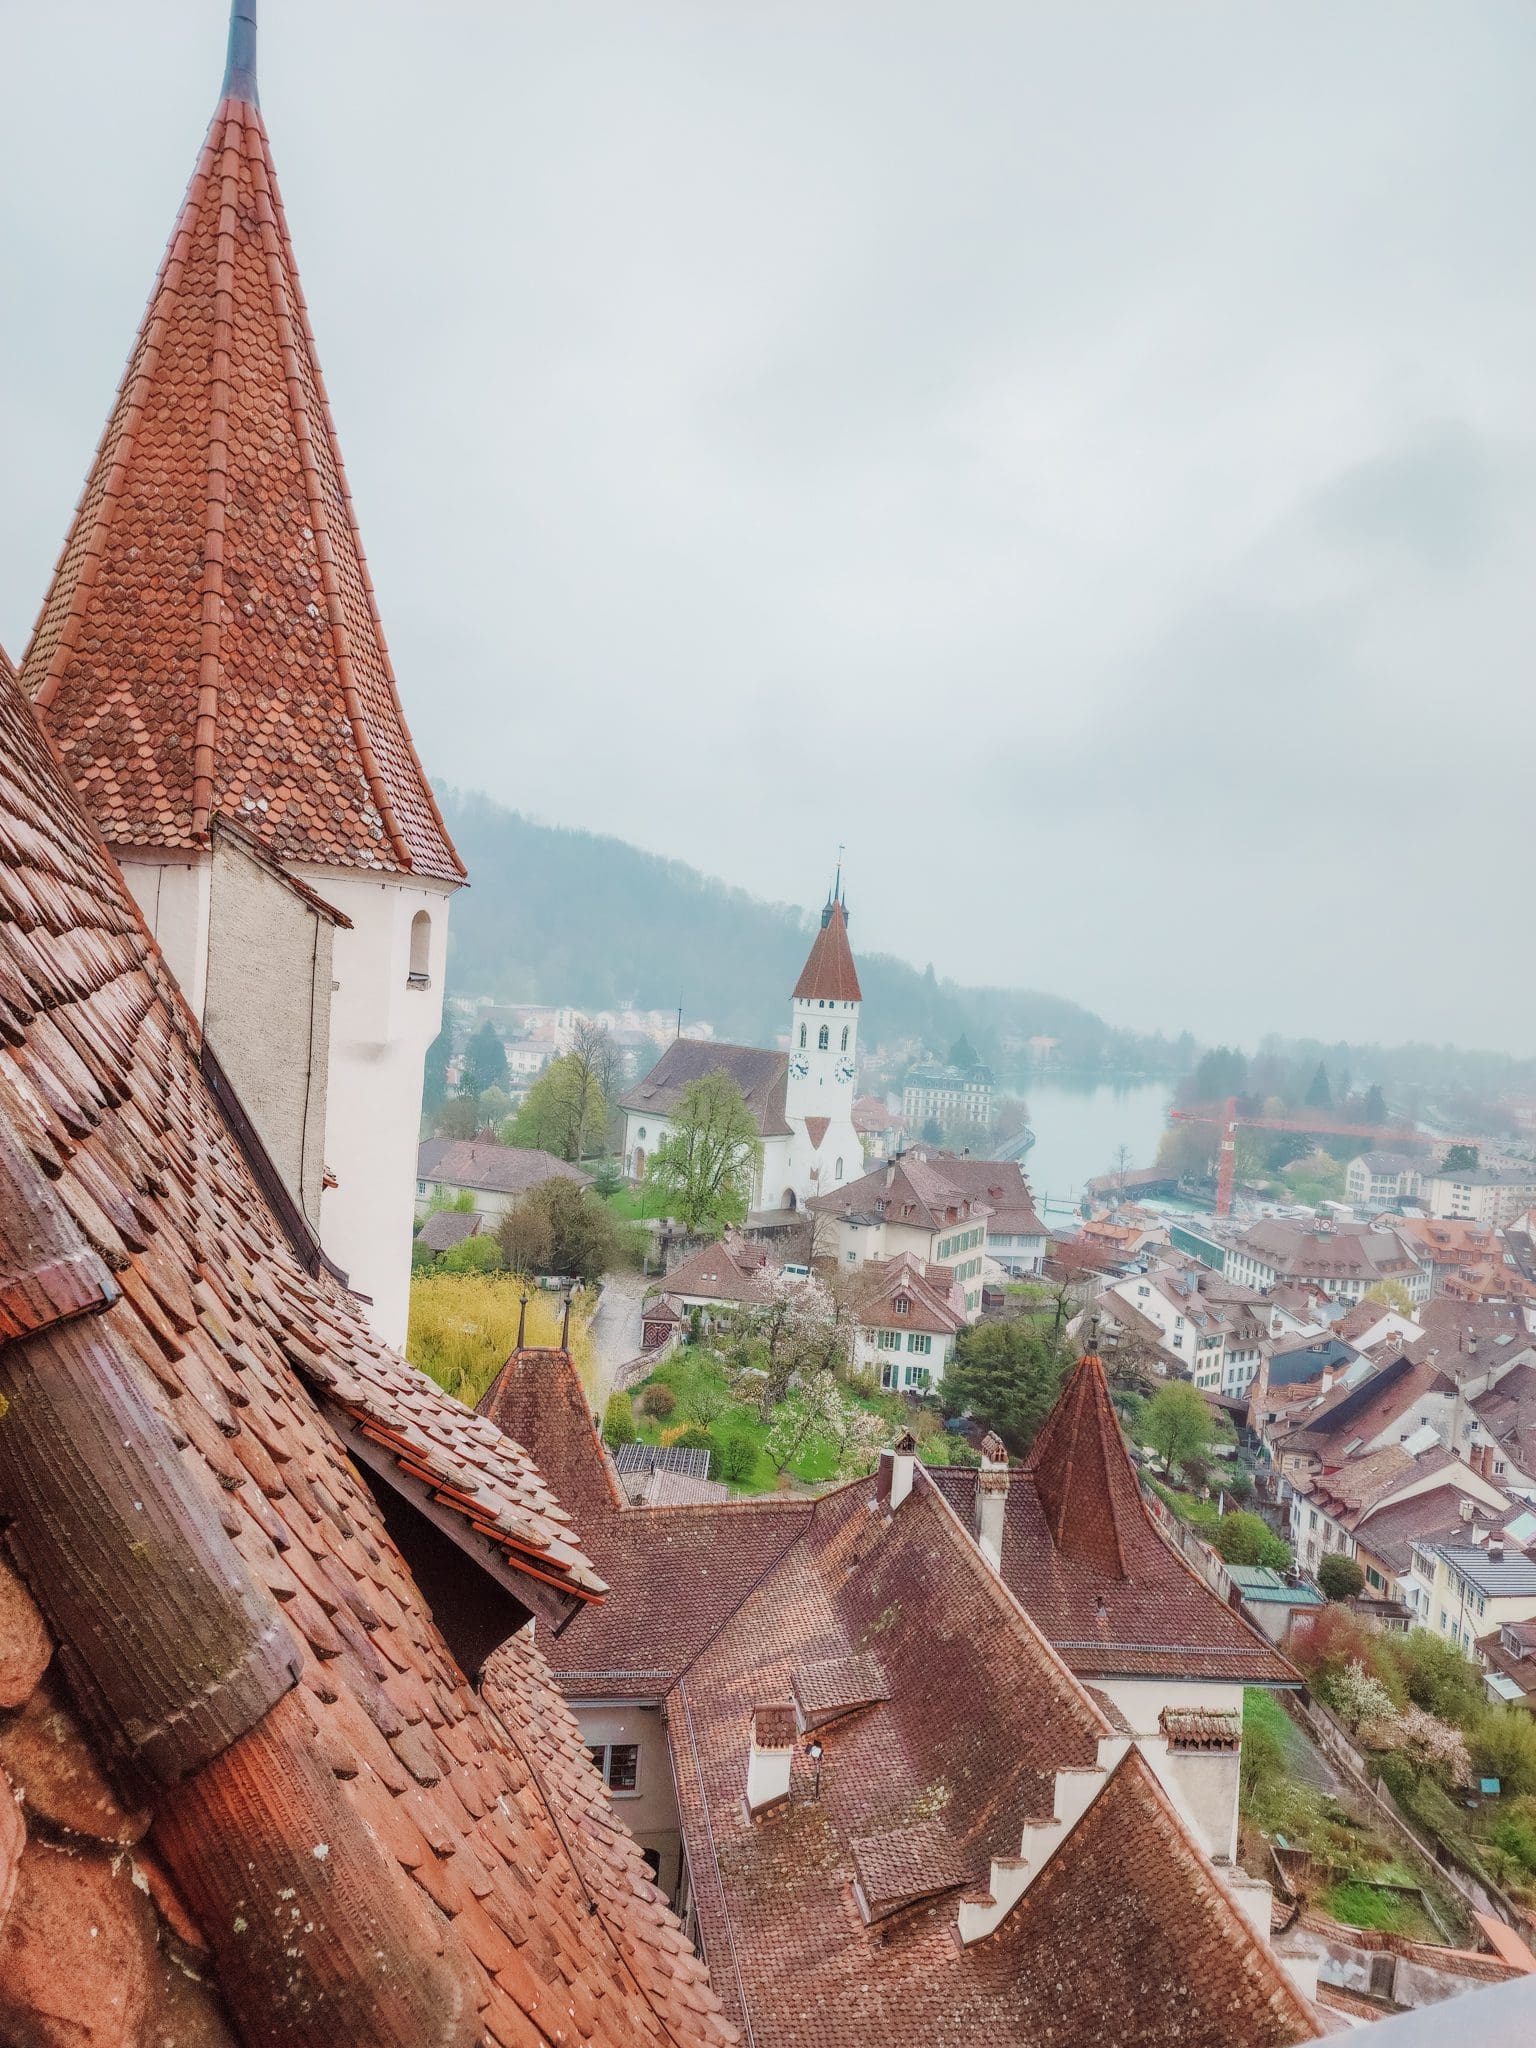 Views from the turret at Thun Castle, Interlaken